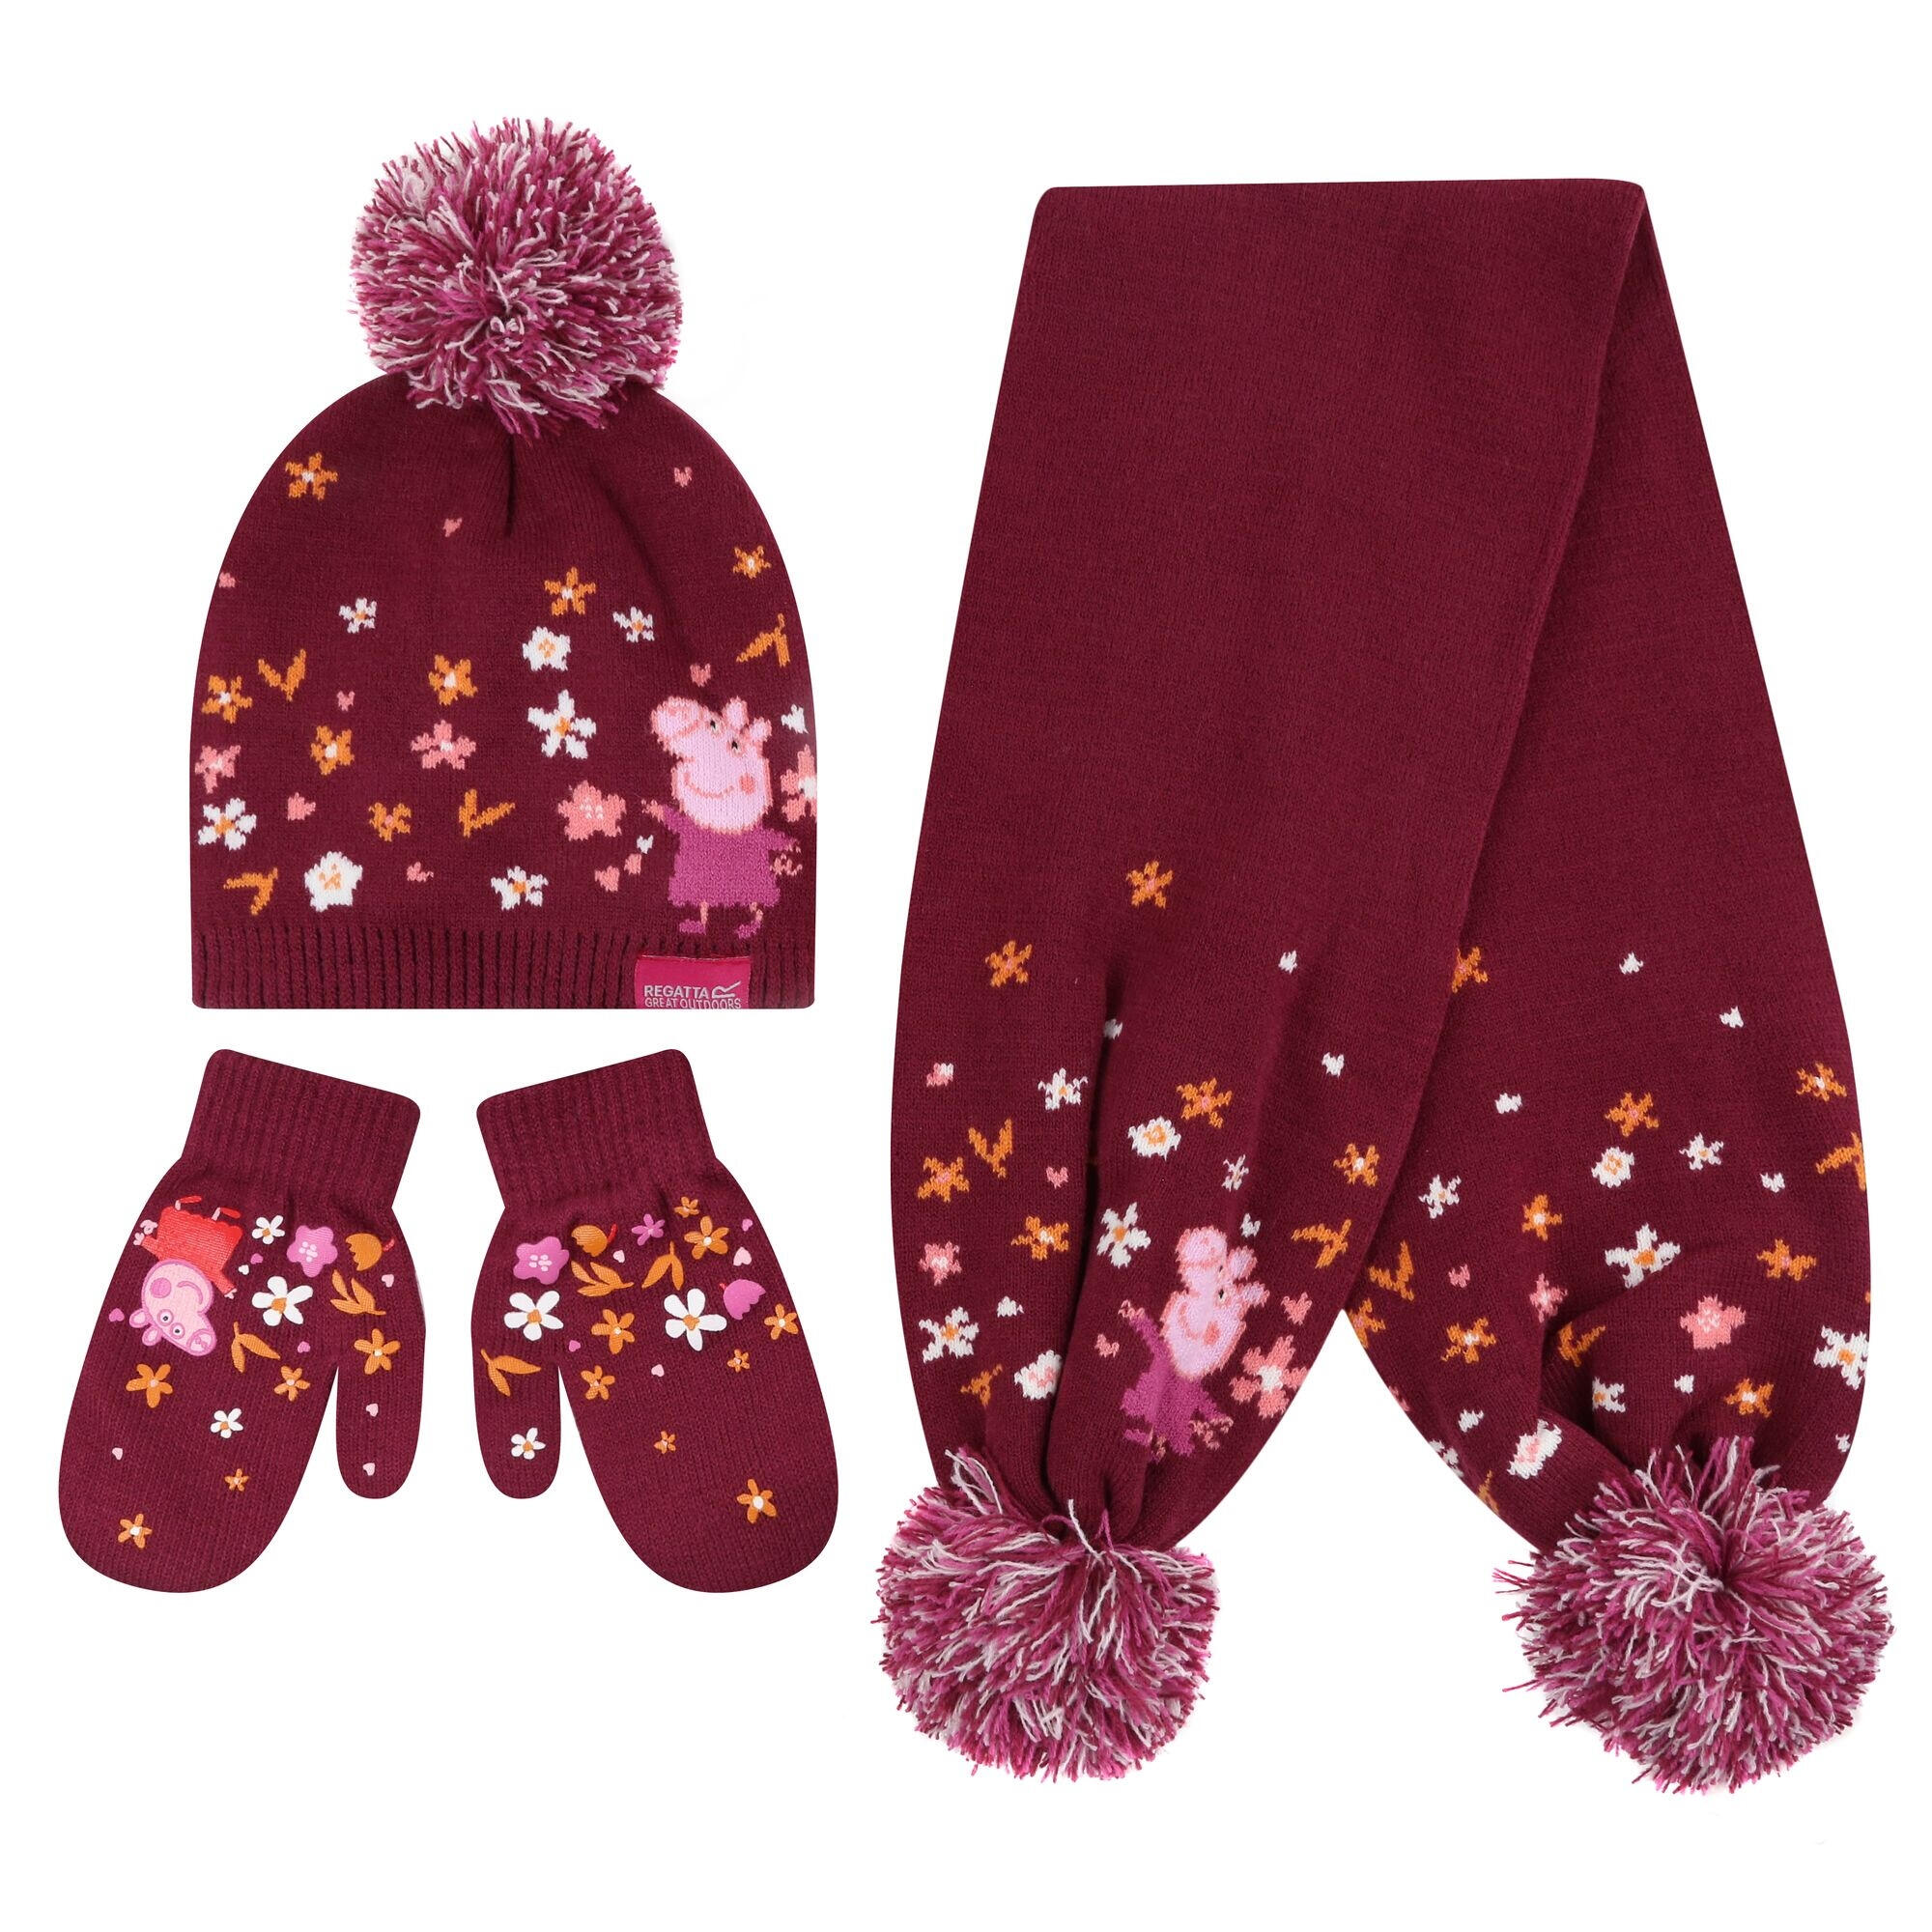 Pom Pom Knitted Peppa Pig Hat Gloves And Scarf Set (Berry Pink/Autumn) 1/4